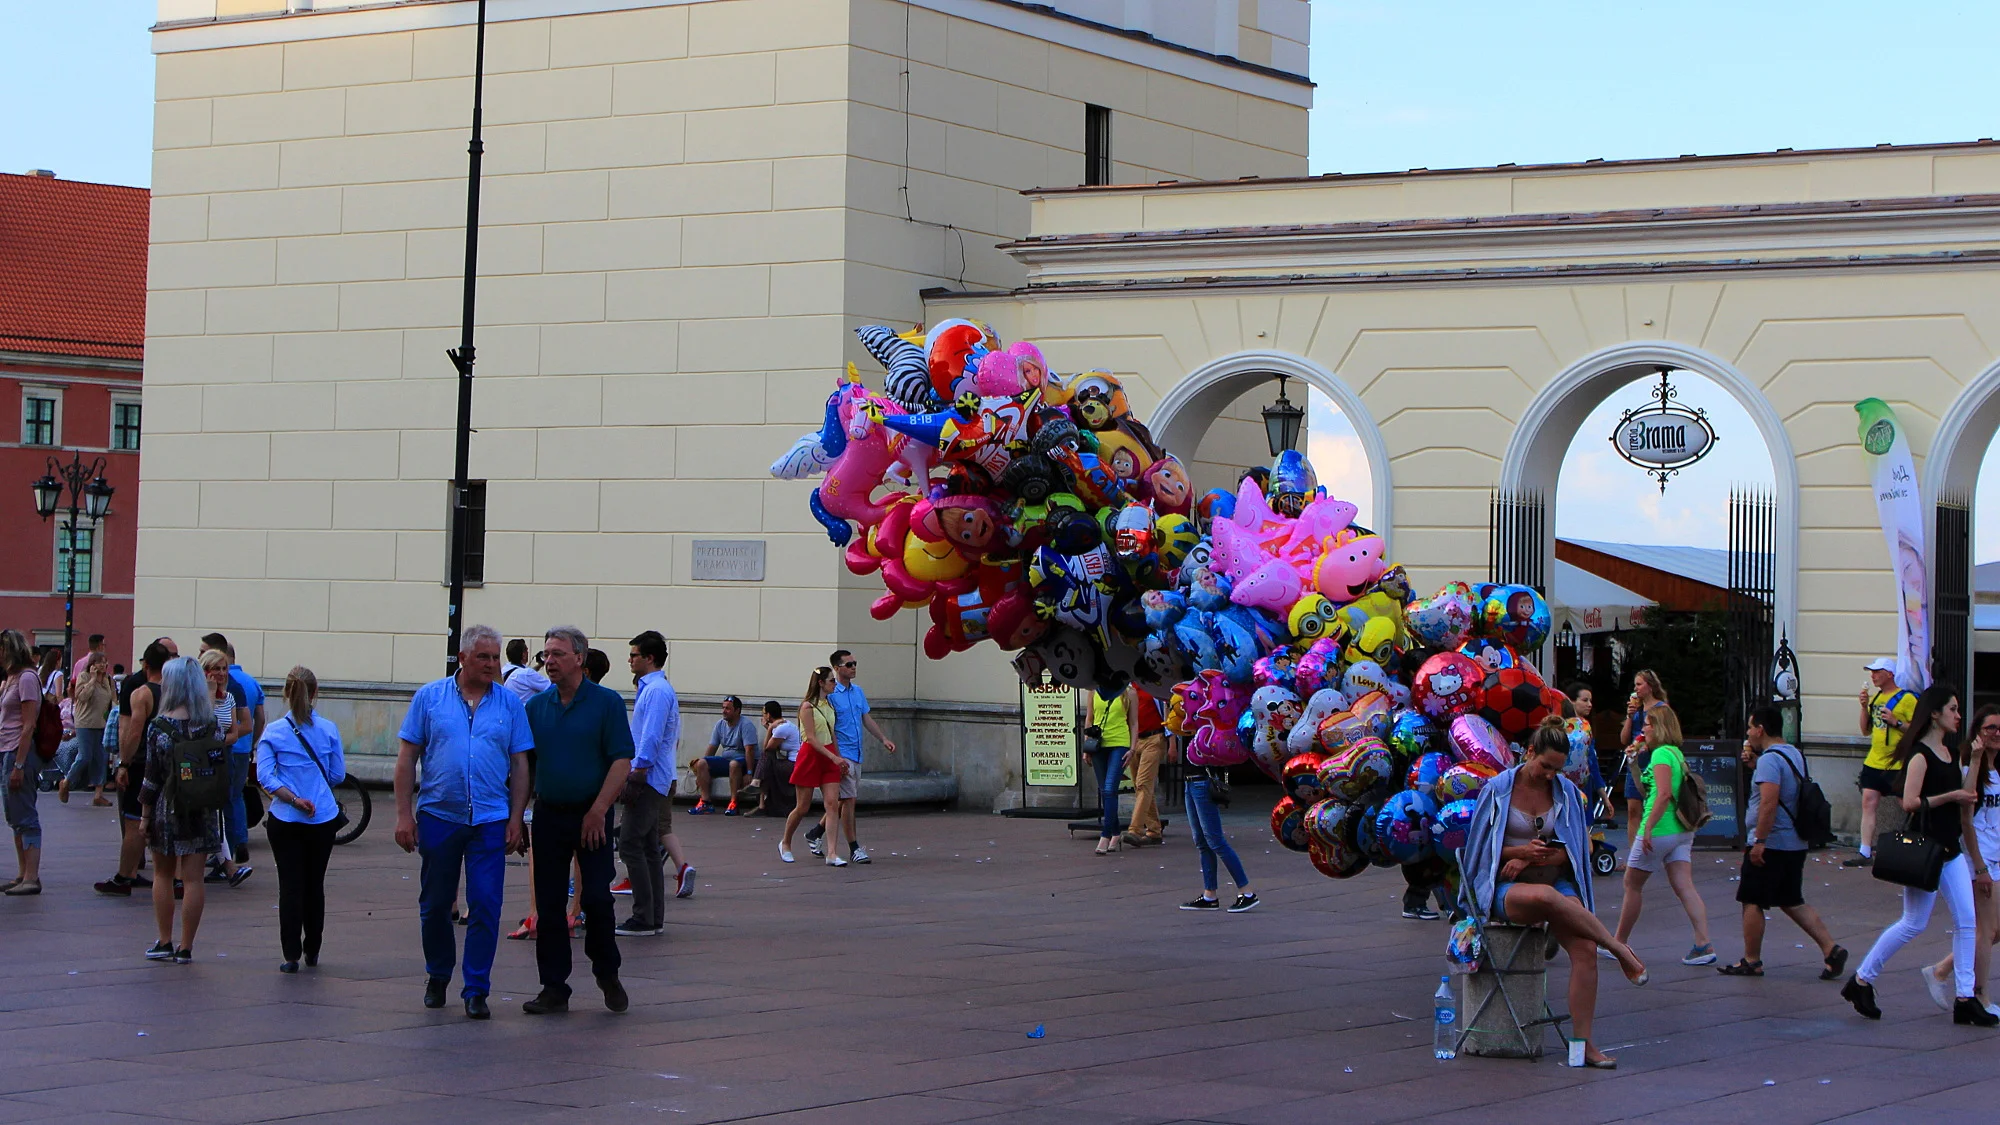 A girl selling balloons that blow in the wind in the Old Town of Warsaw.